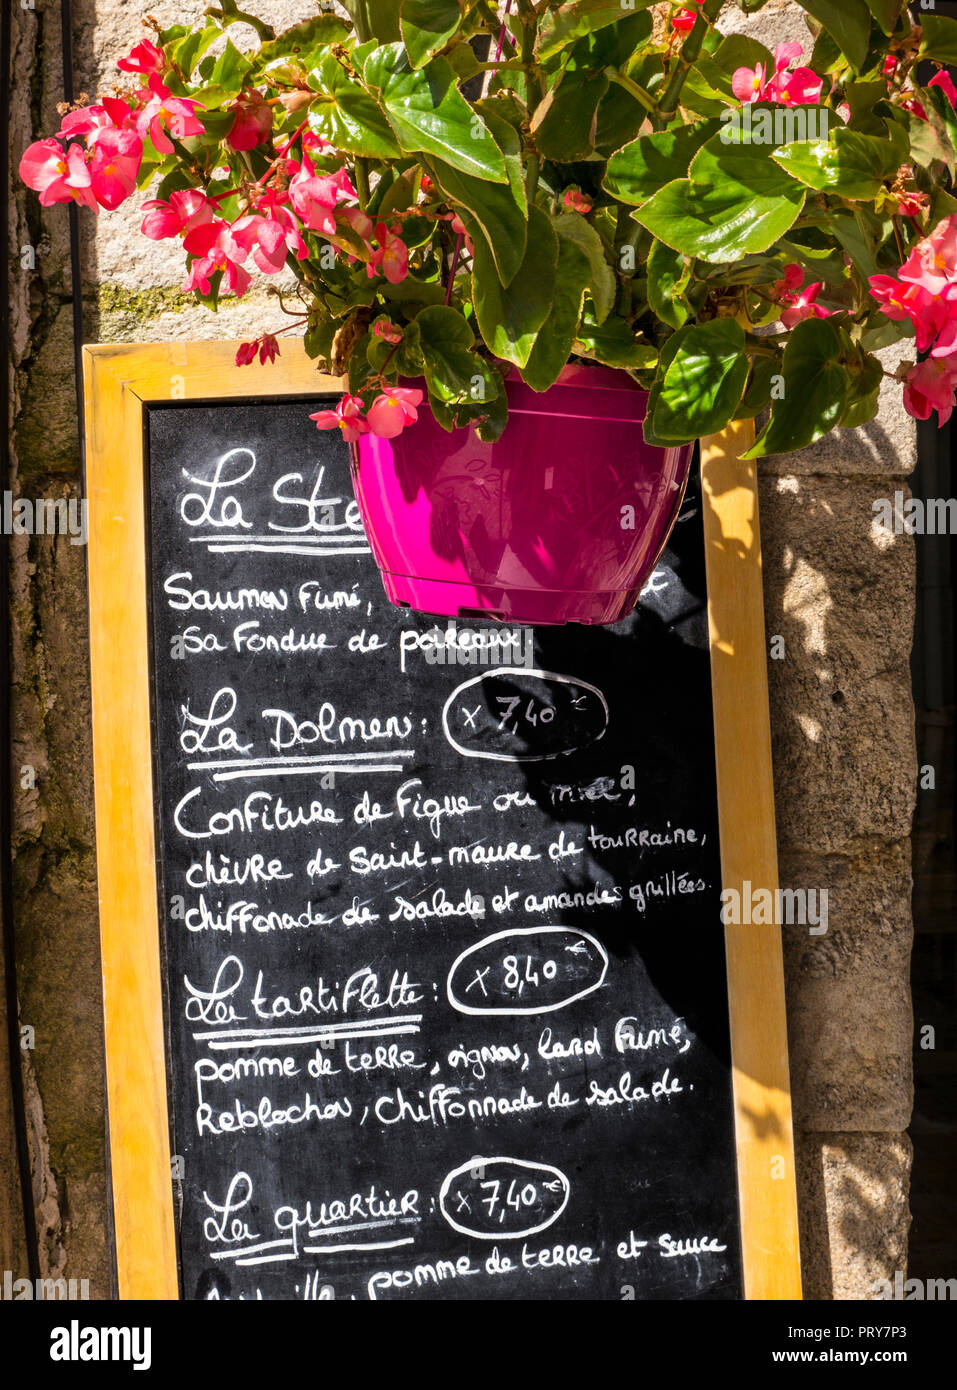 BLACKBOARD MENU FRANCE Blackboard menu specials of the day ‘PLAT DU JOUR’ outside rustic Brittany restaurant with flowers Bretagne Finistere France Stock Photo